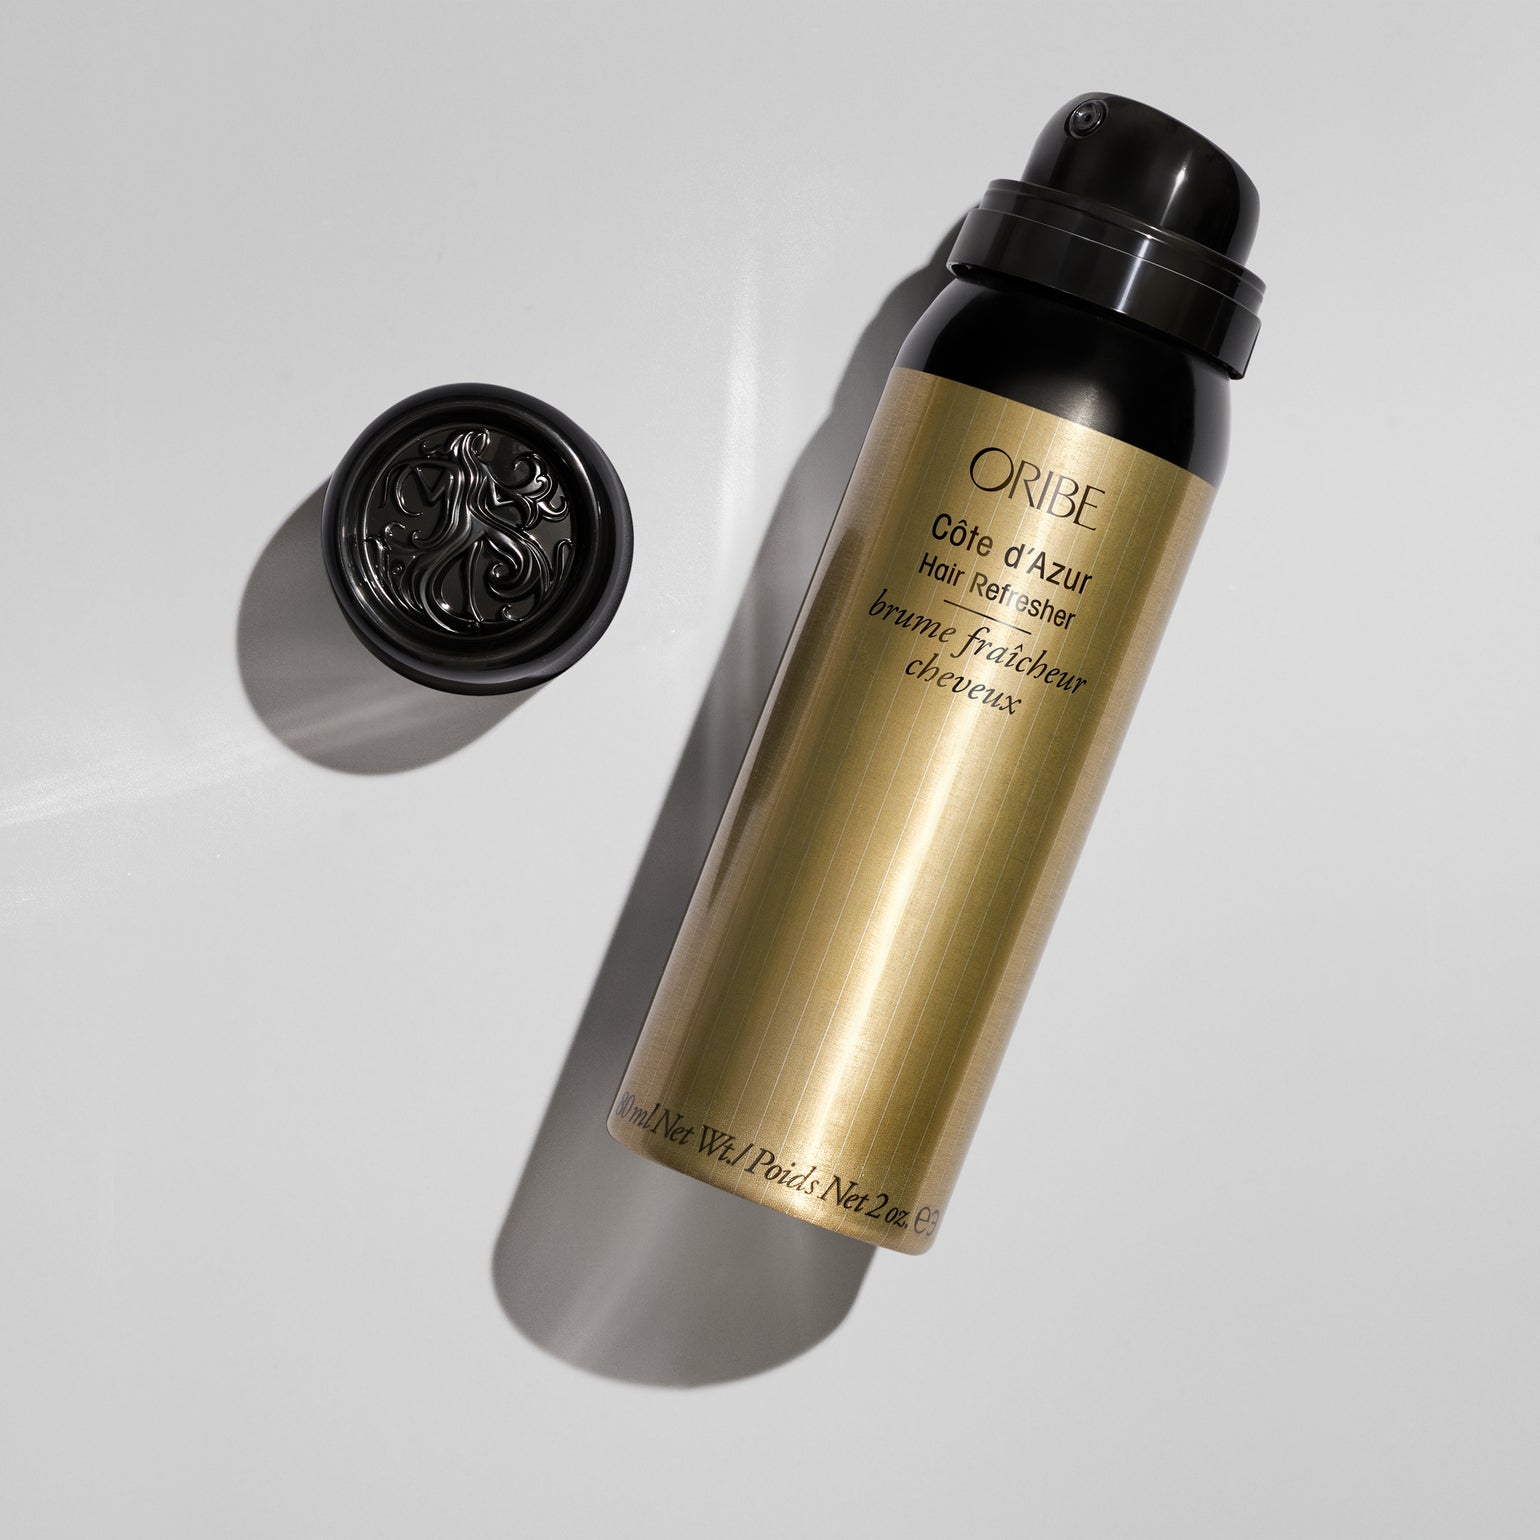 Cote d'Azur Hair Refresher by Oribe